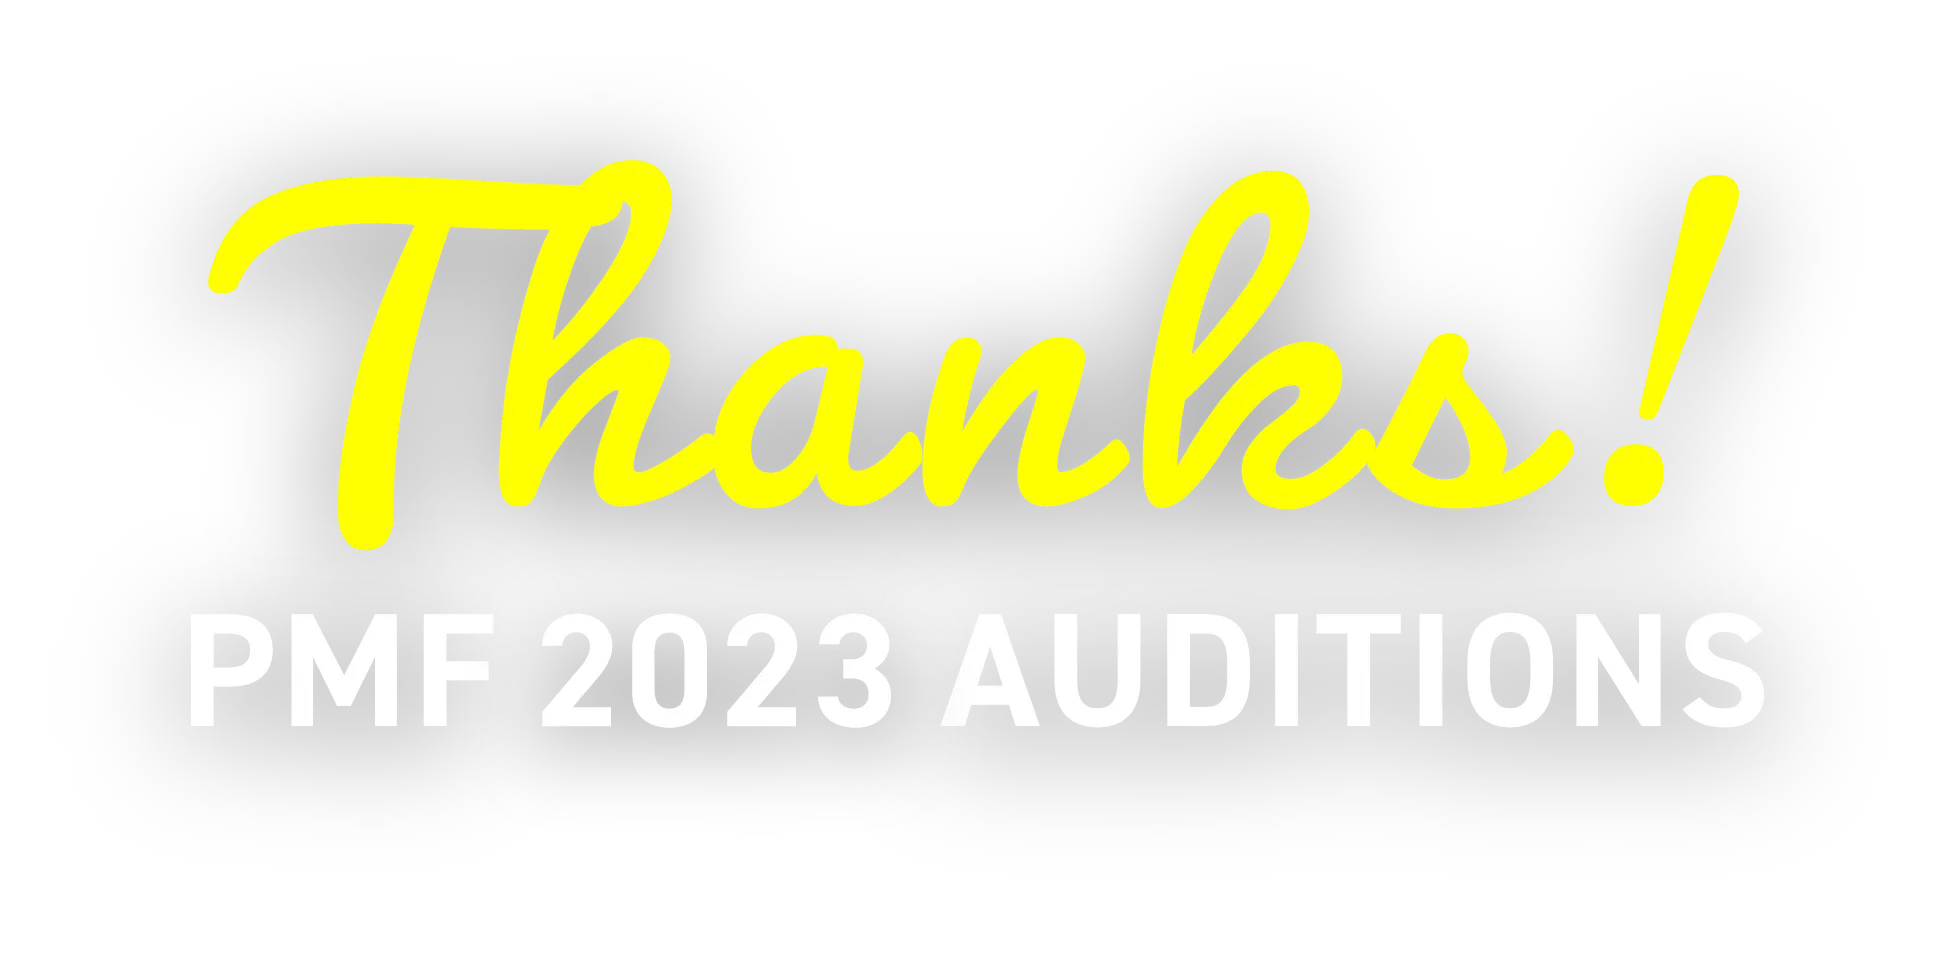 Thanks! PMF 2023 auditions